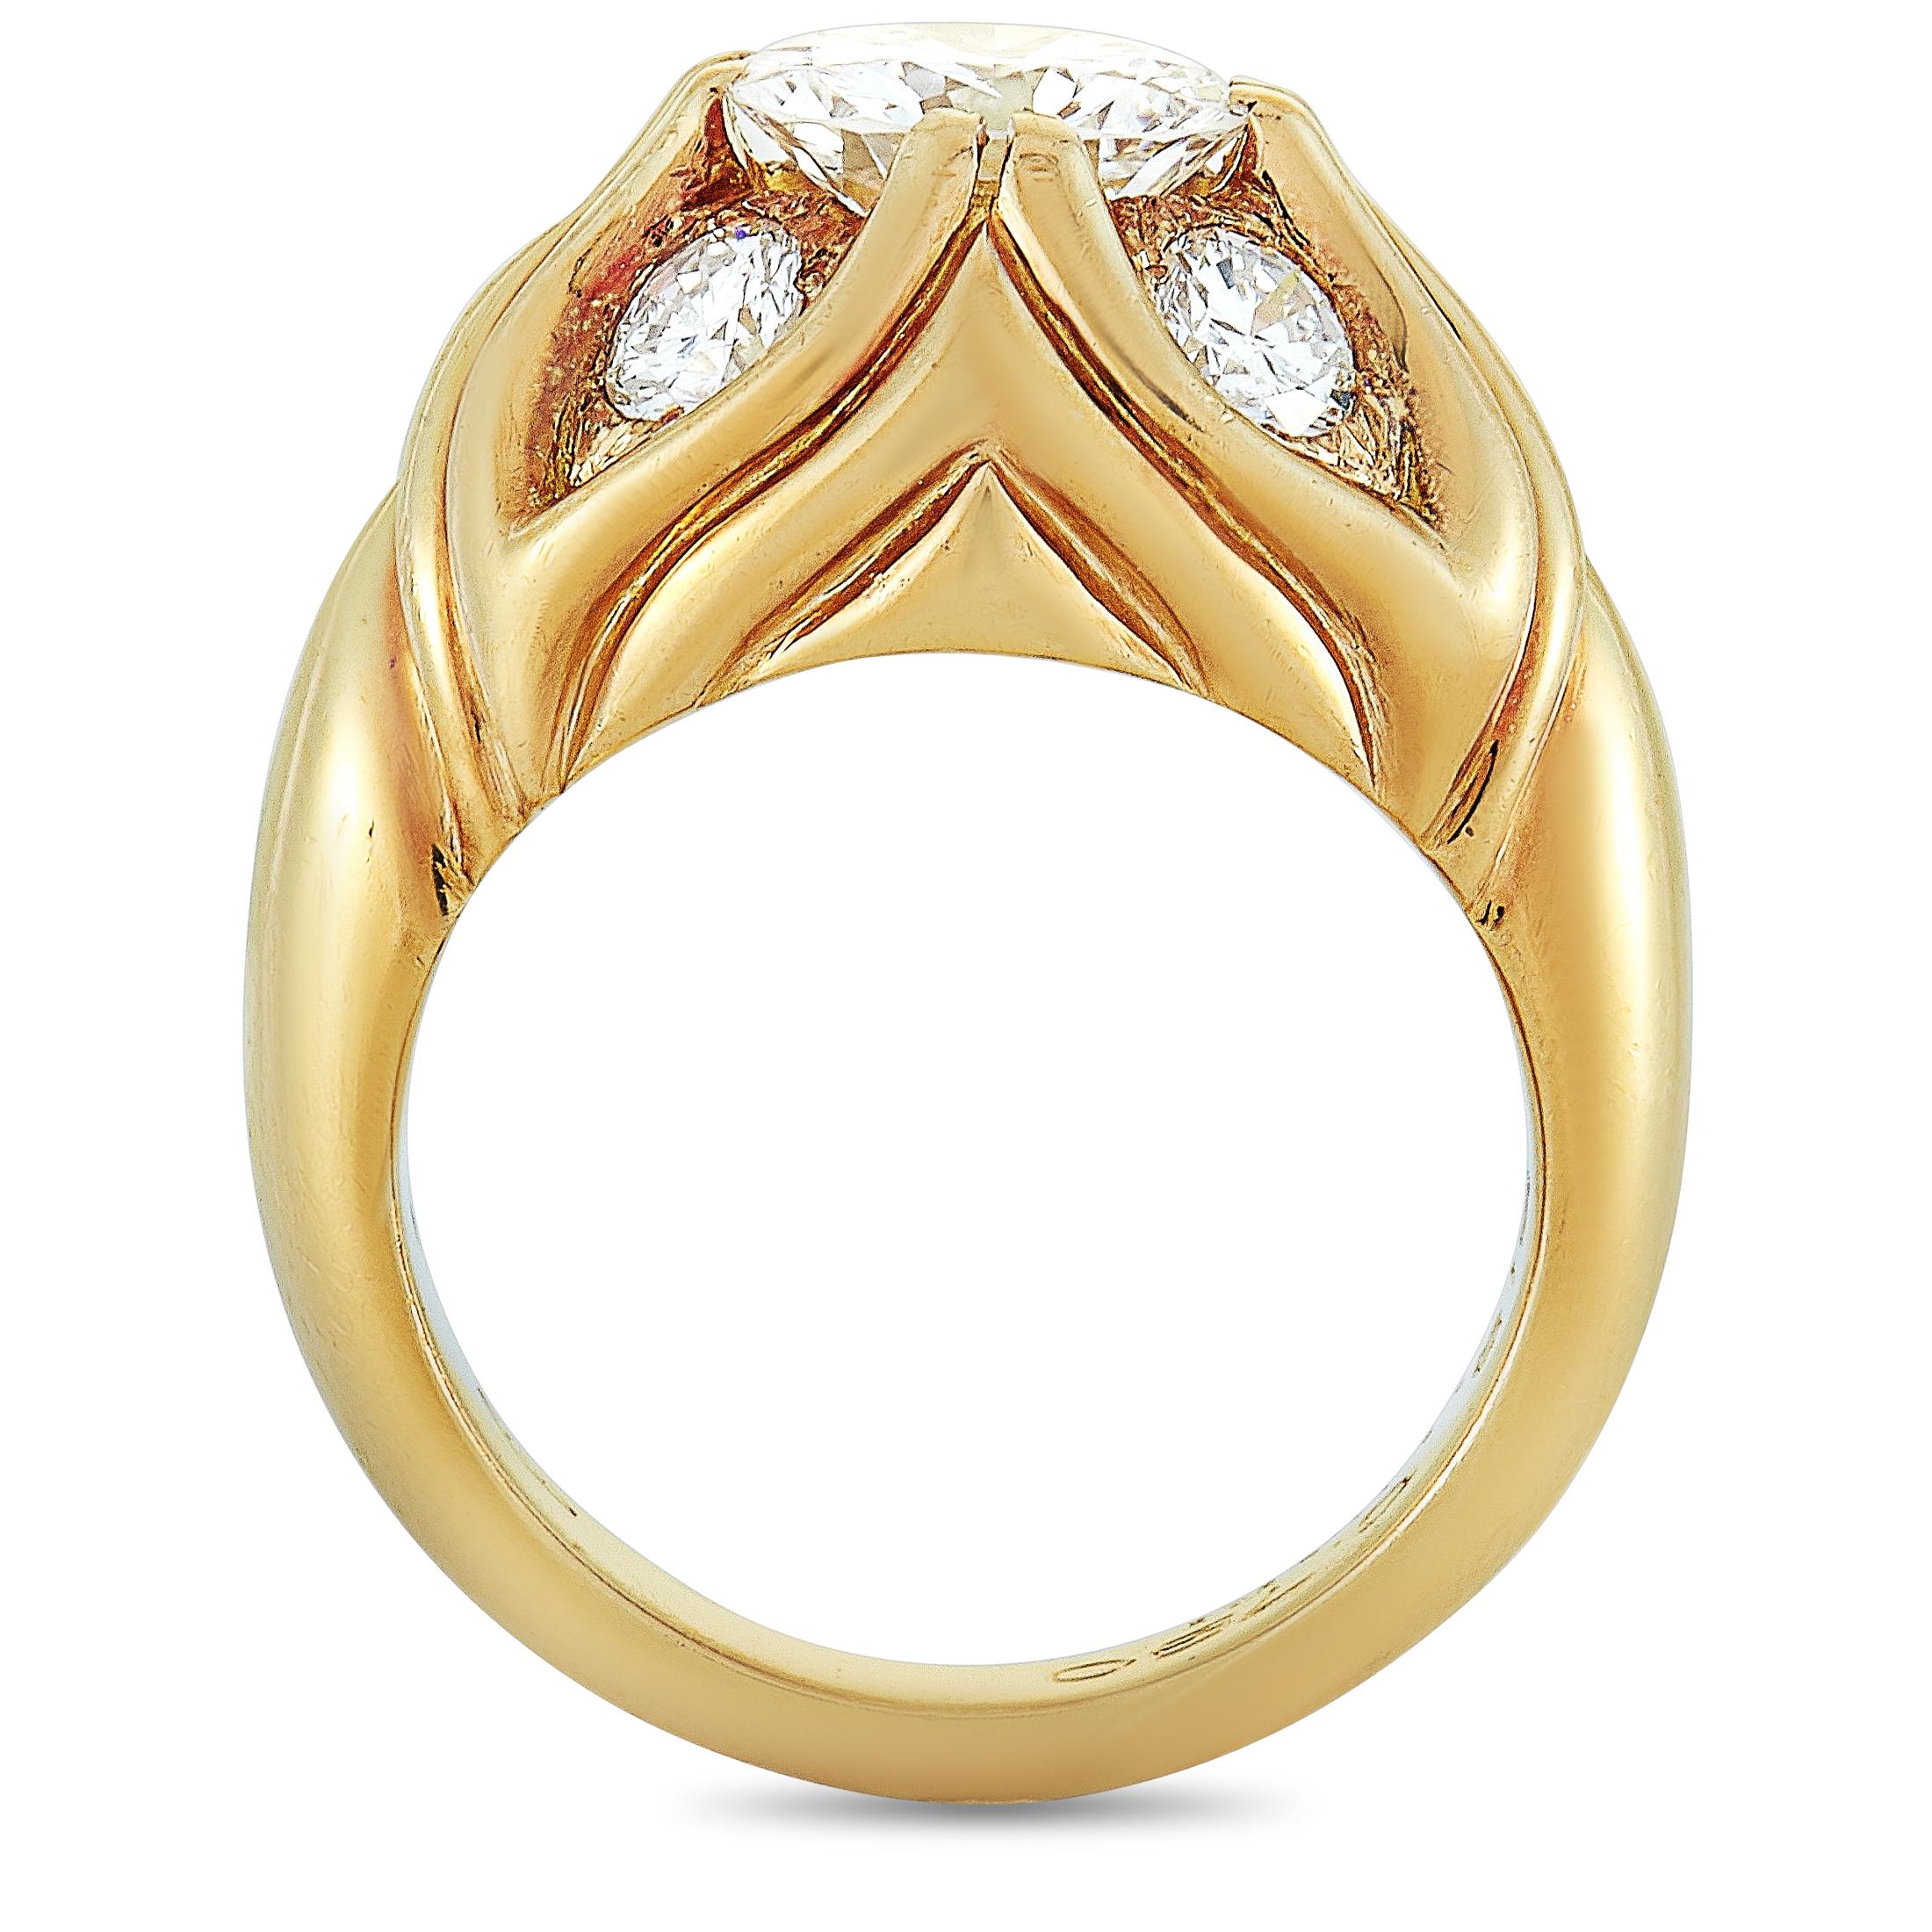 This Bvlgari ring is crafted from 18K yellow gold and weighs 15.6 grams. It boasts band thickness of 3 mm and top height of 9 mm, while top dimensions measure 16 by 14 mm. The ring is set with a total of approximately 2.60 carats of diamonds, with